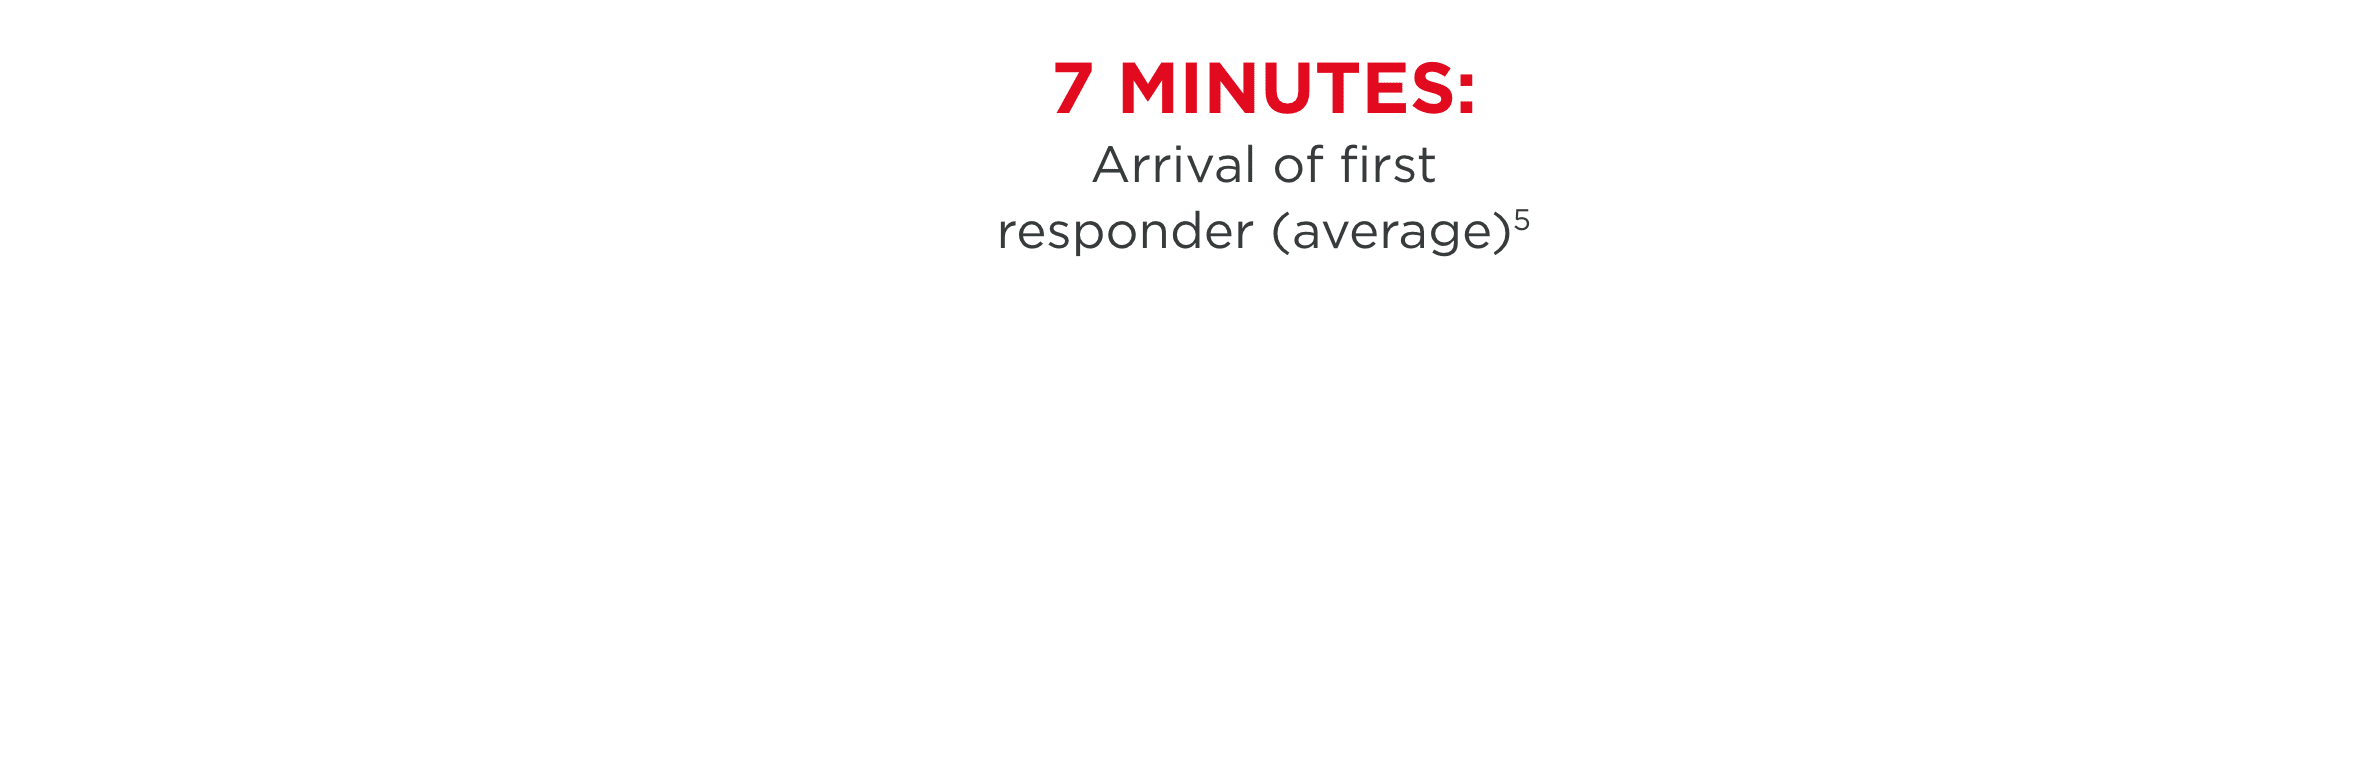 infographic of opioid overdose response timing. 1-2 minutes: brain damage may begin. 5 minutes: death of brain cells and severe brain damage. 7 minutes: arrival of first responder (average). 10 minutes: death is likely